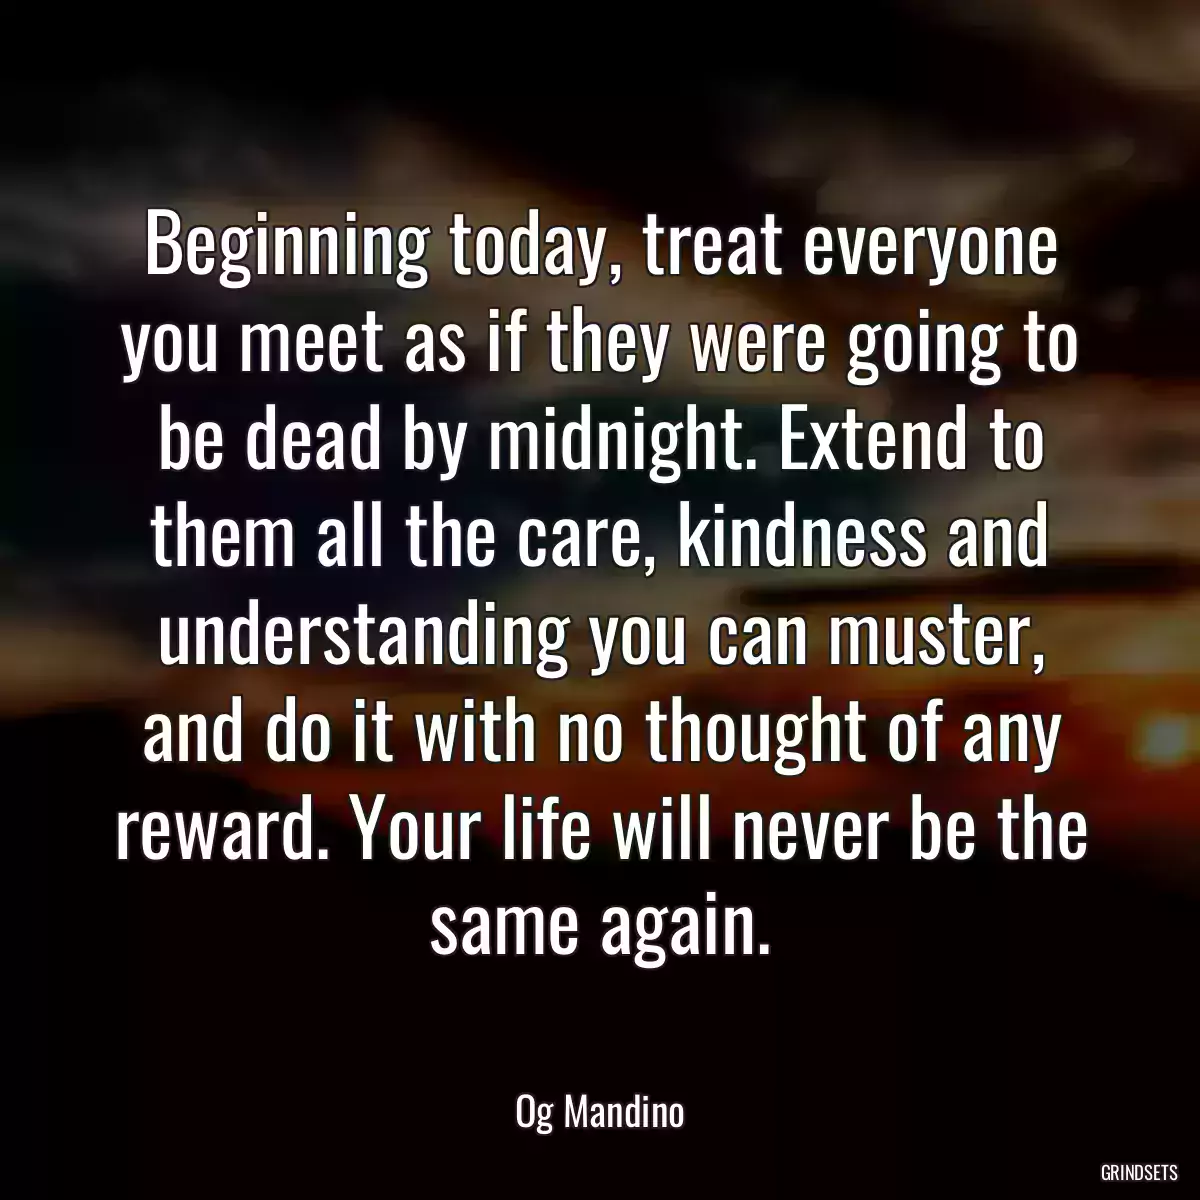 Beginning today, treat everyone you meet as if they were going to be dead by midnight. Extend to them all the care, kindness and understanding you can muster, and do it with no thought of any reward. Your life will never be the same again.